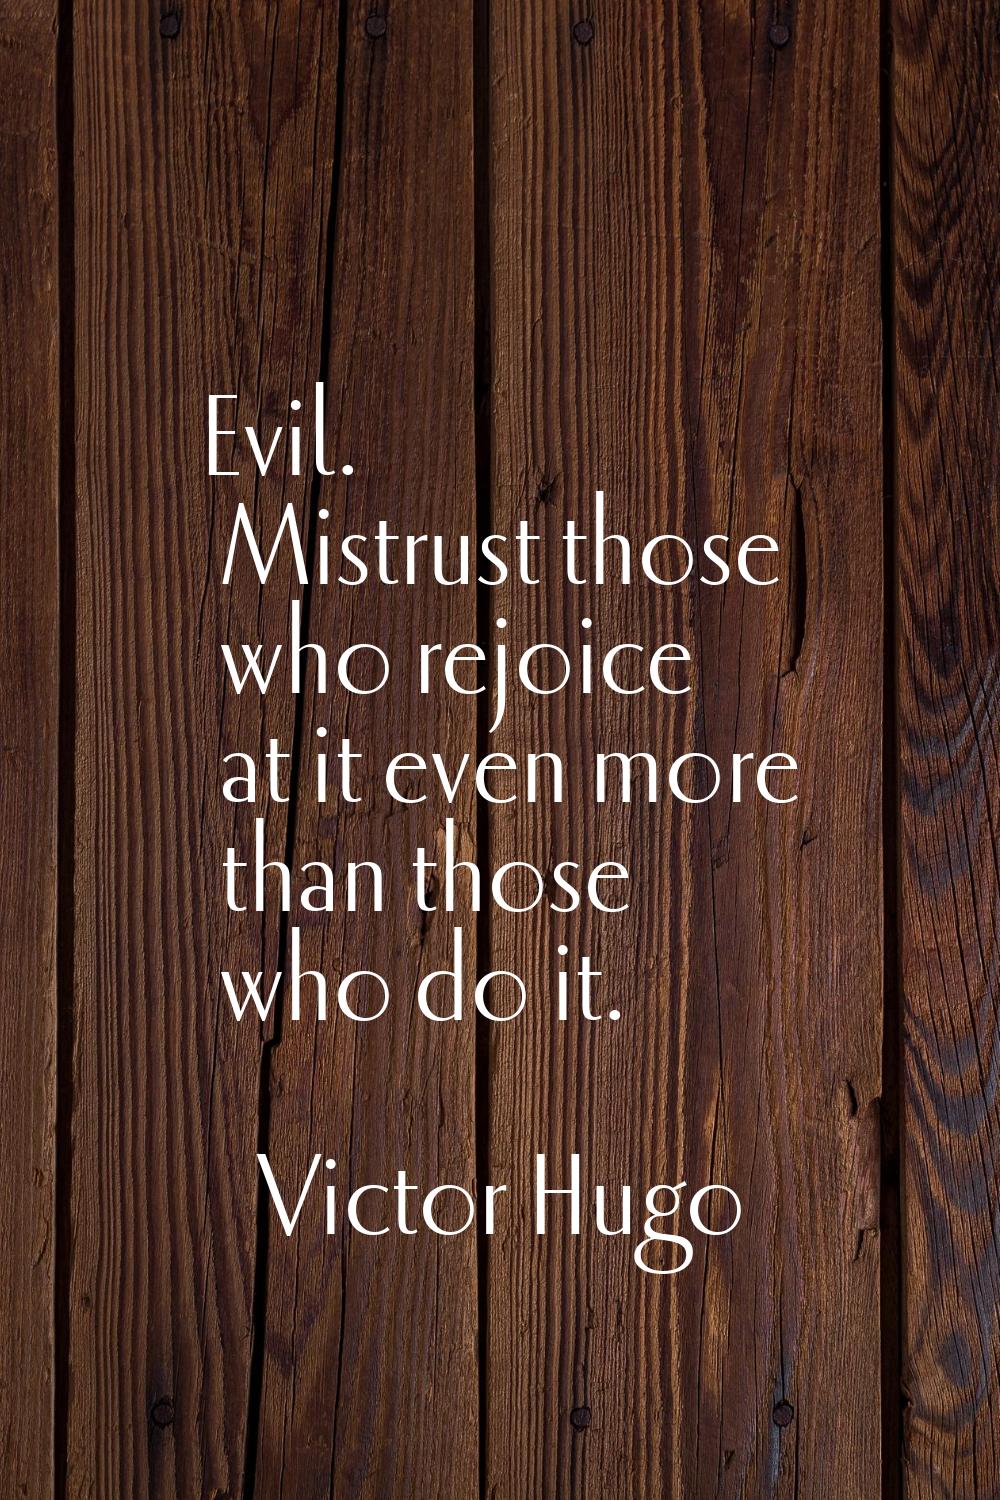 Evil. Mistrust those who rejoice at it even more than those who do it.